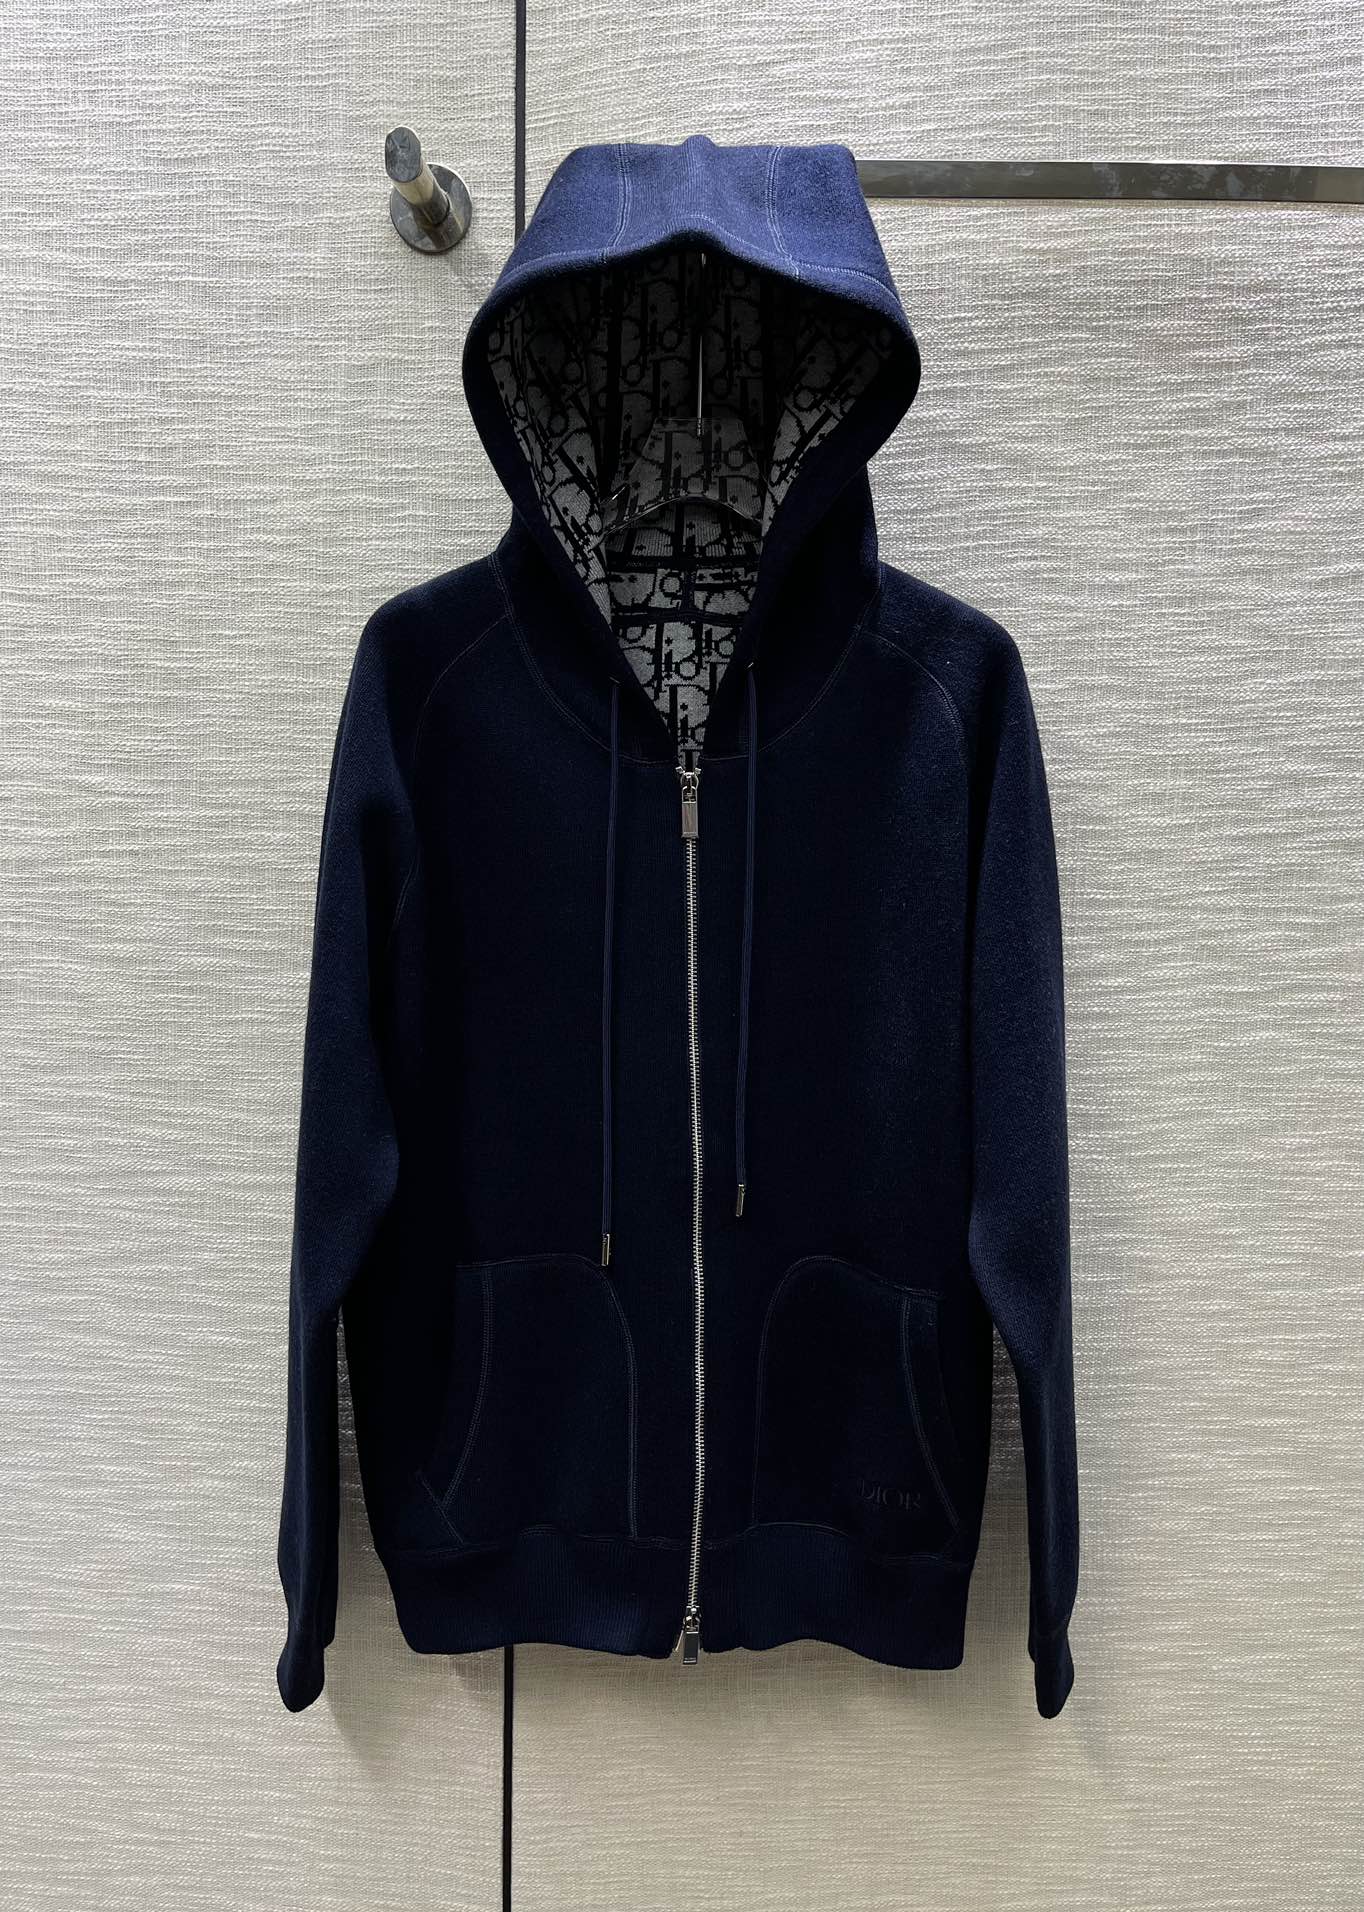 Dior 1:1 Clothing Coats & Jackets Fall/Winter Collection Hooded Top